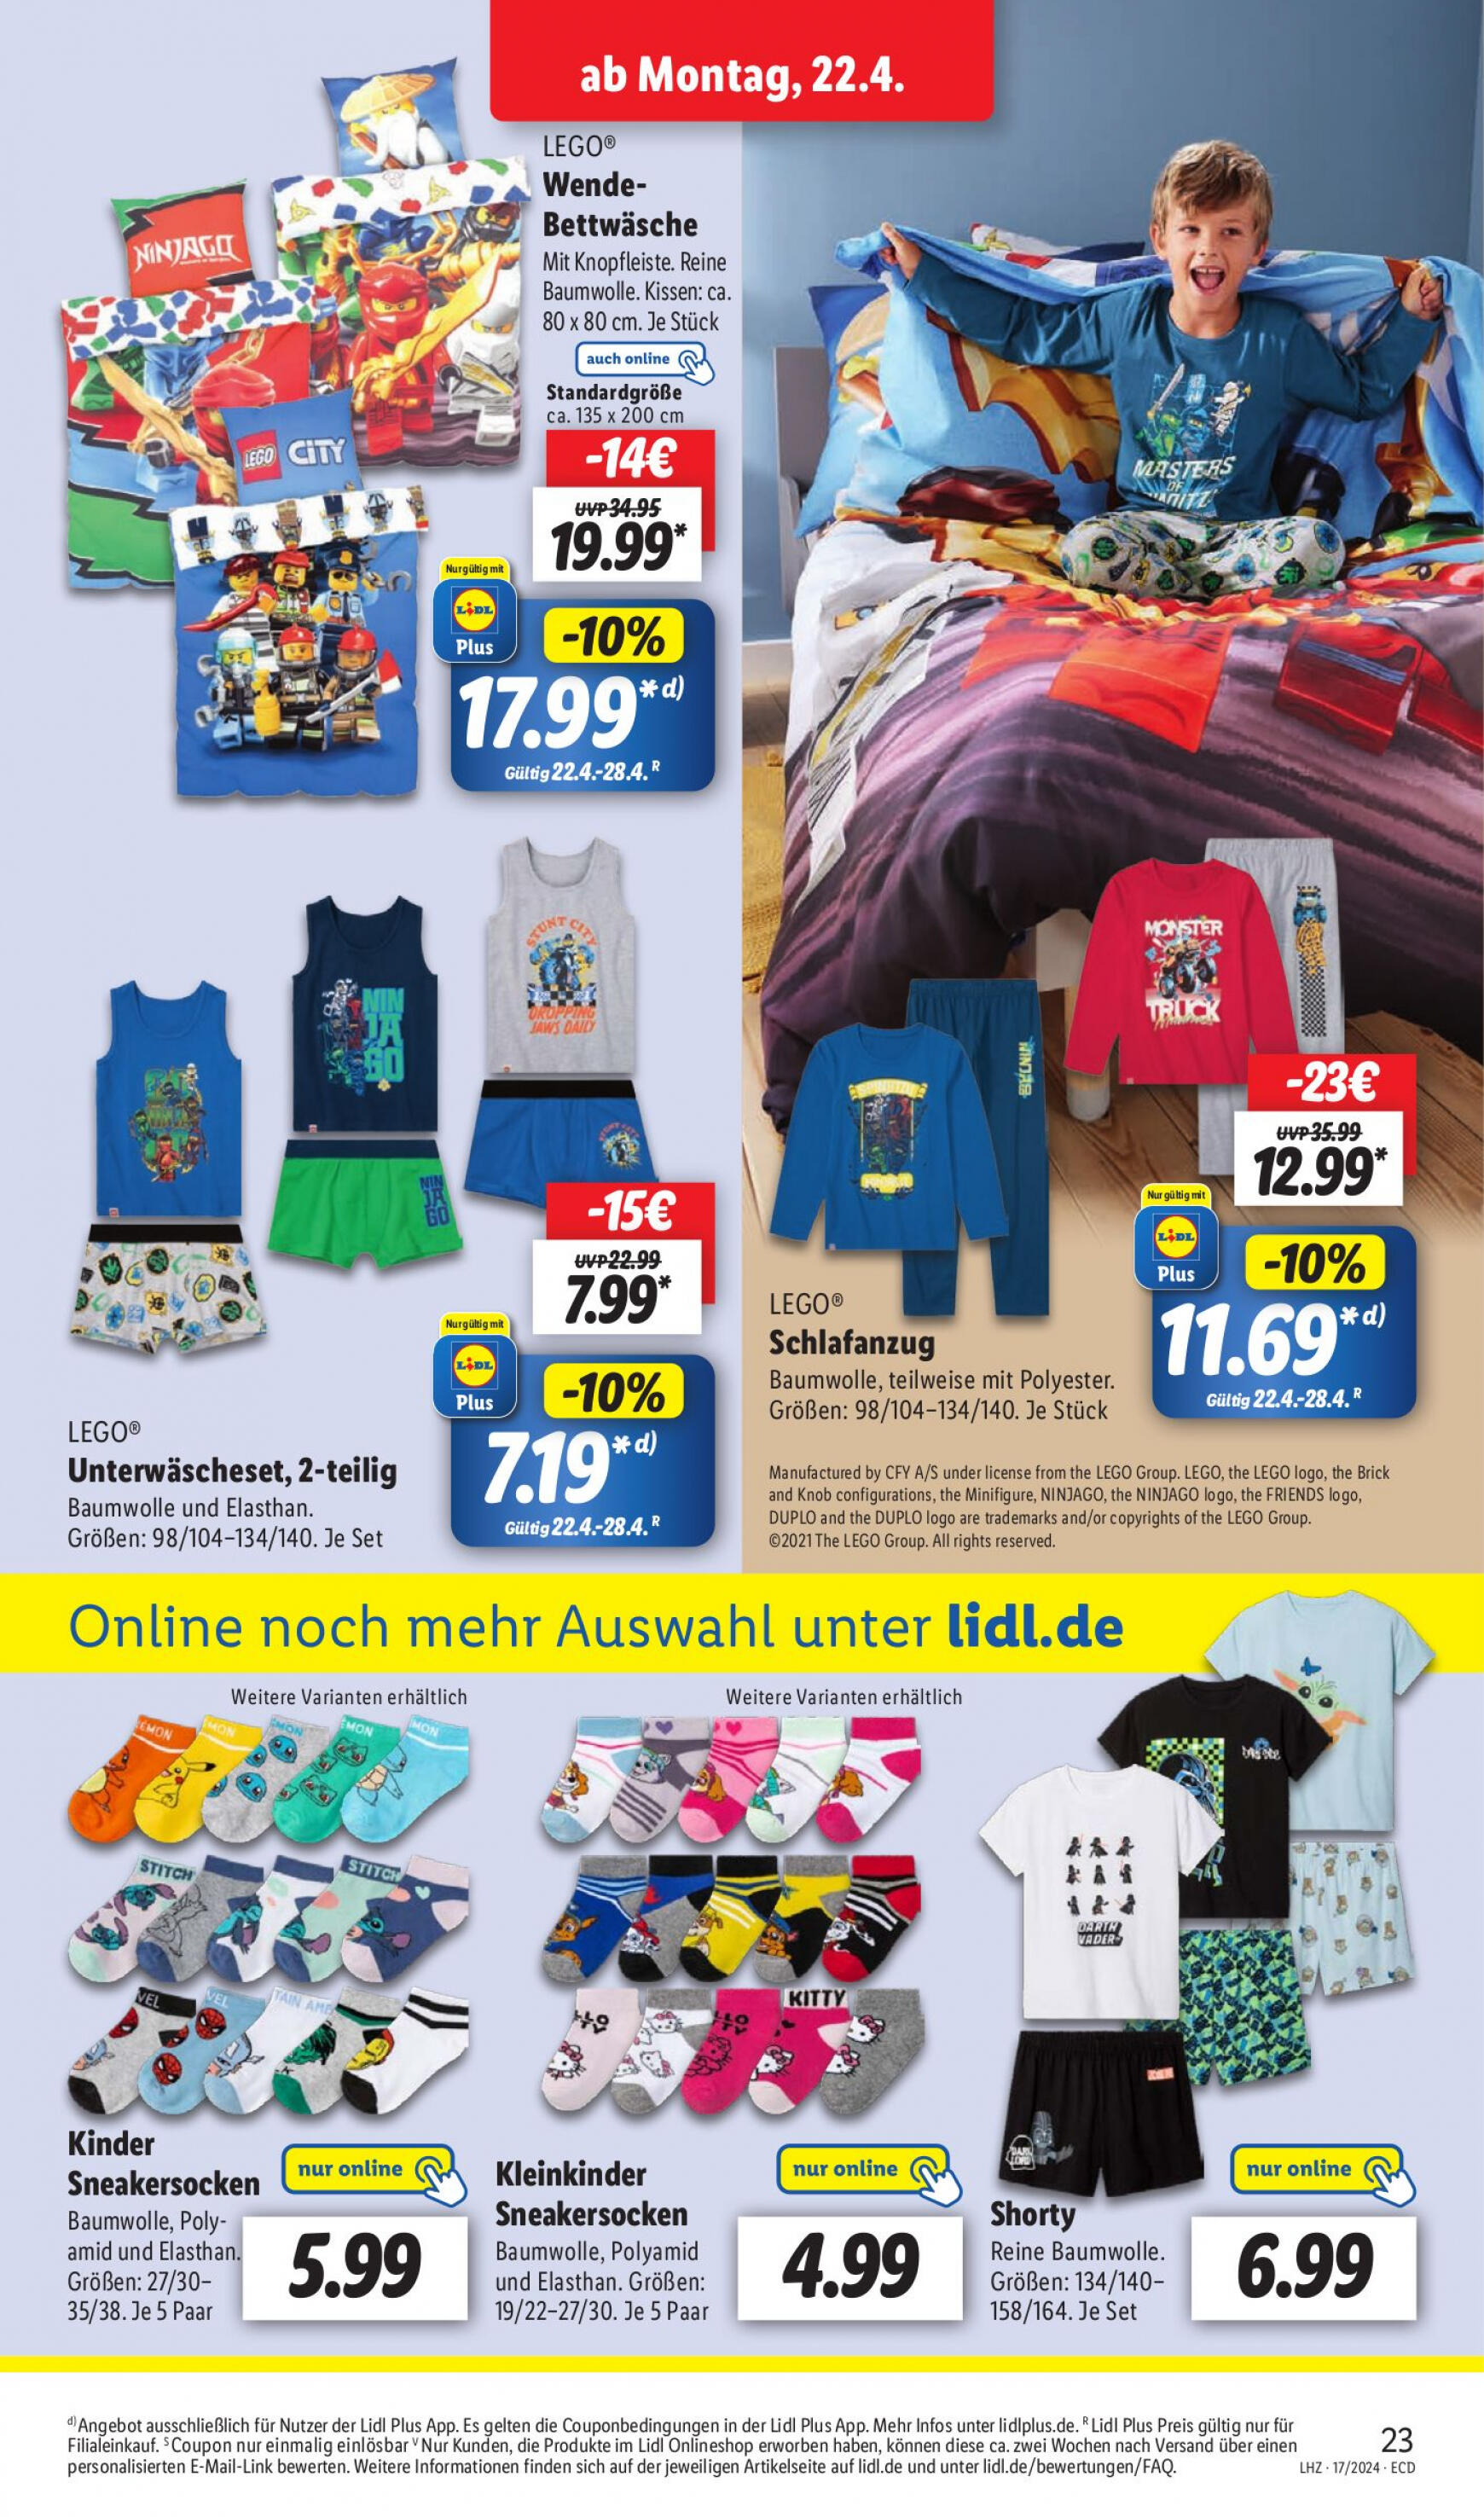 lidl - Flyer Lidl aktuell 22.04. - 27.04. - page: 27